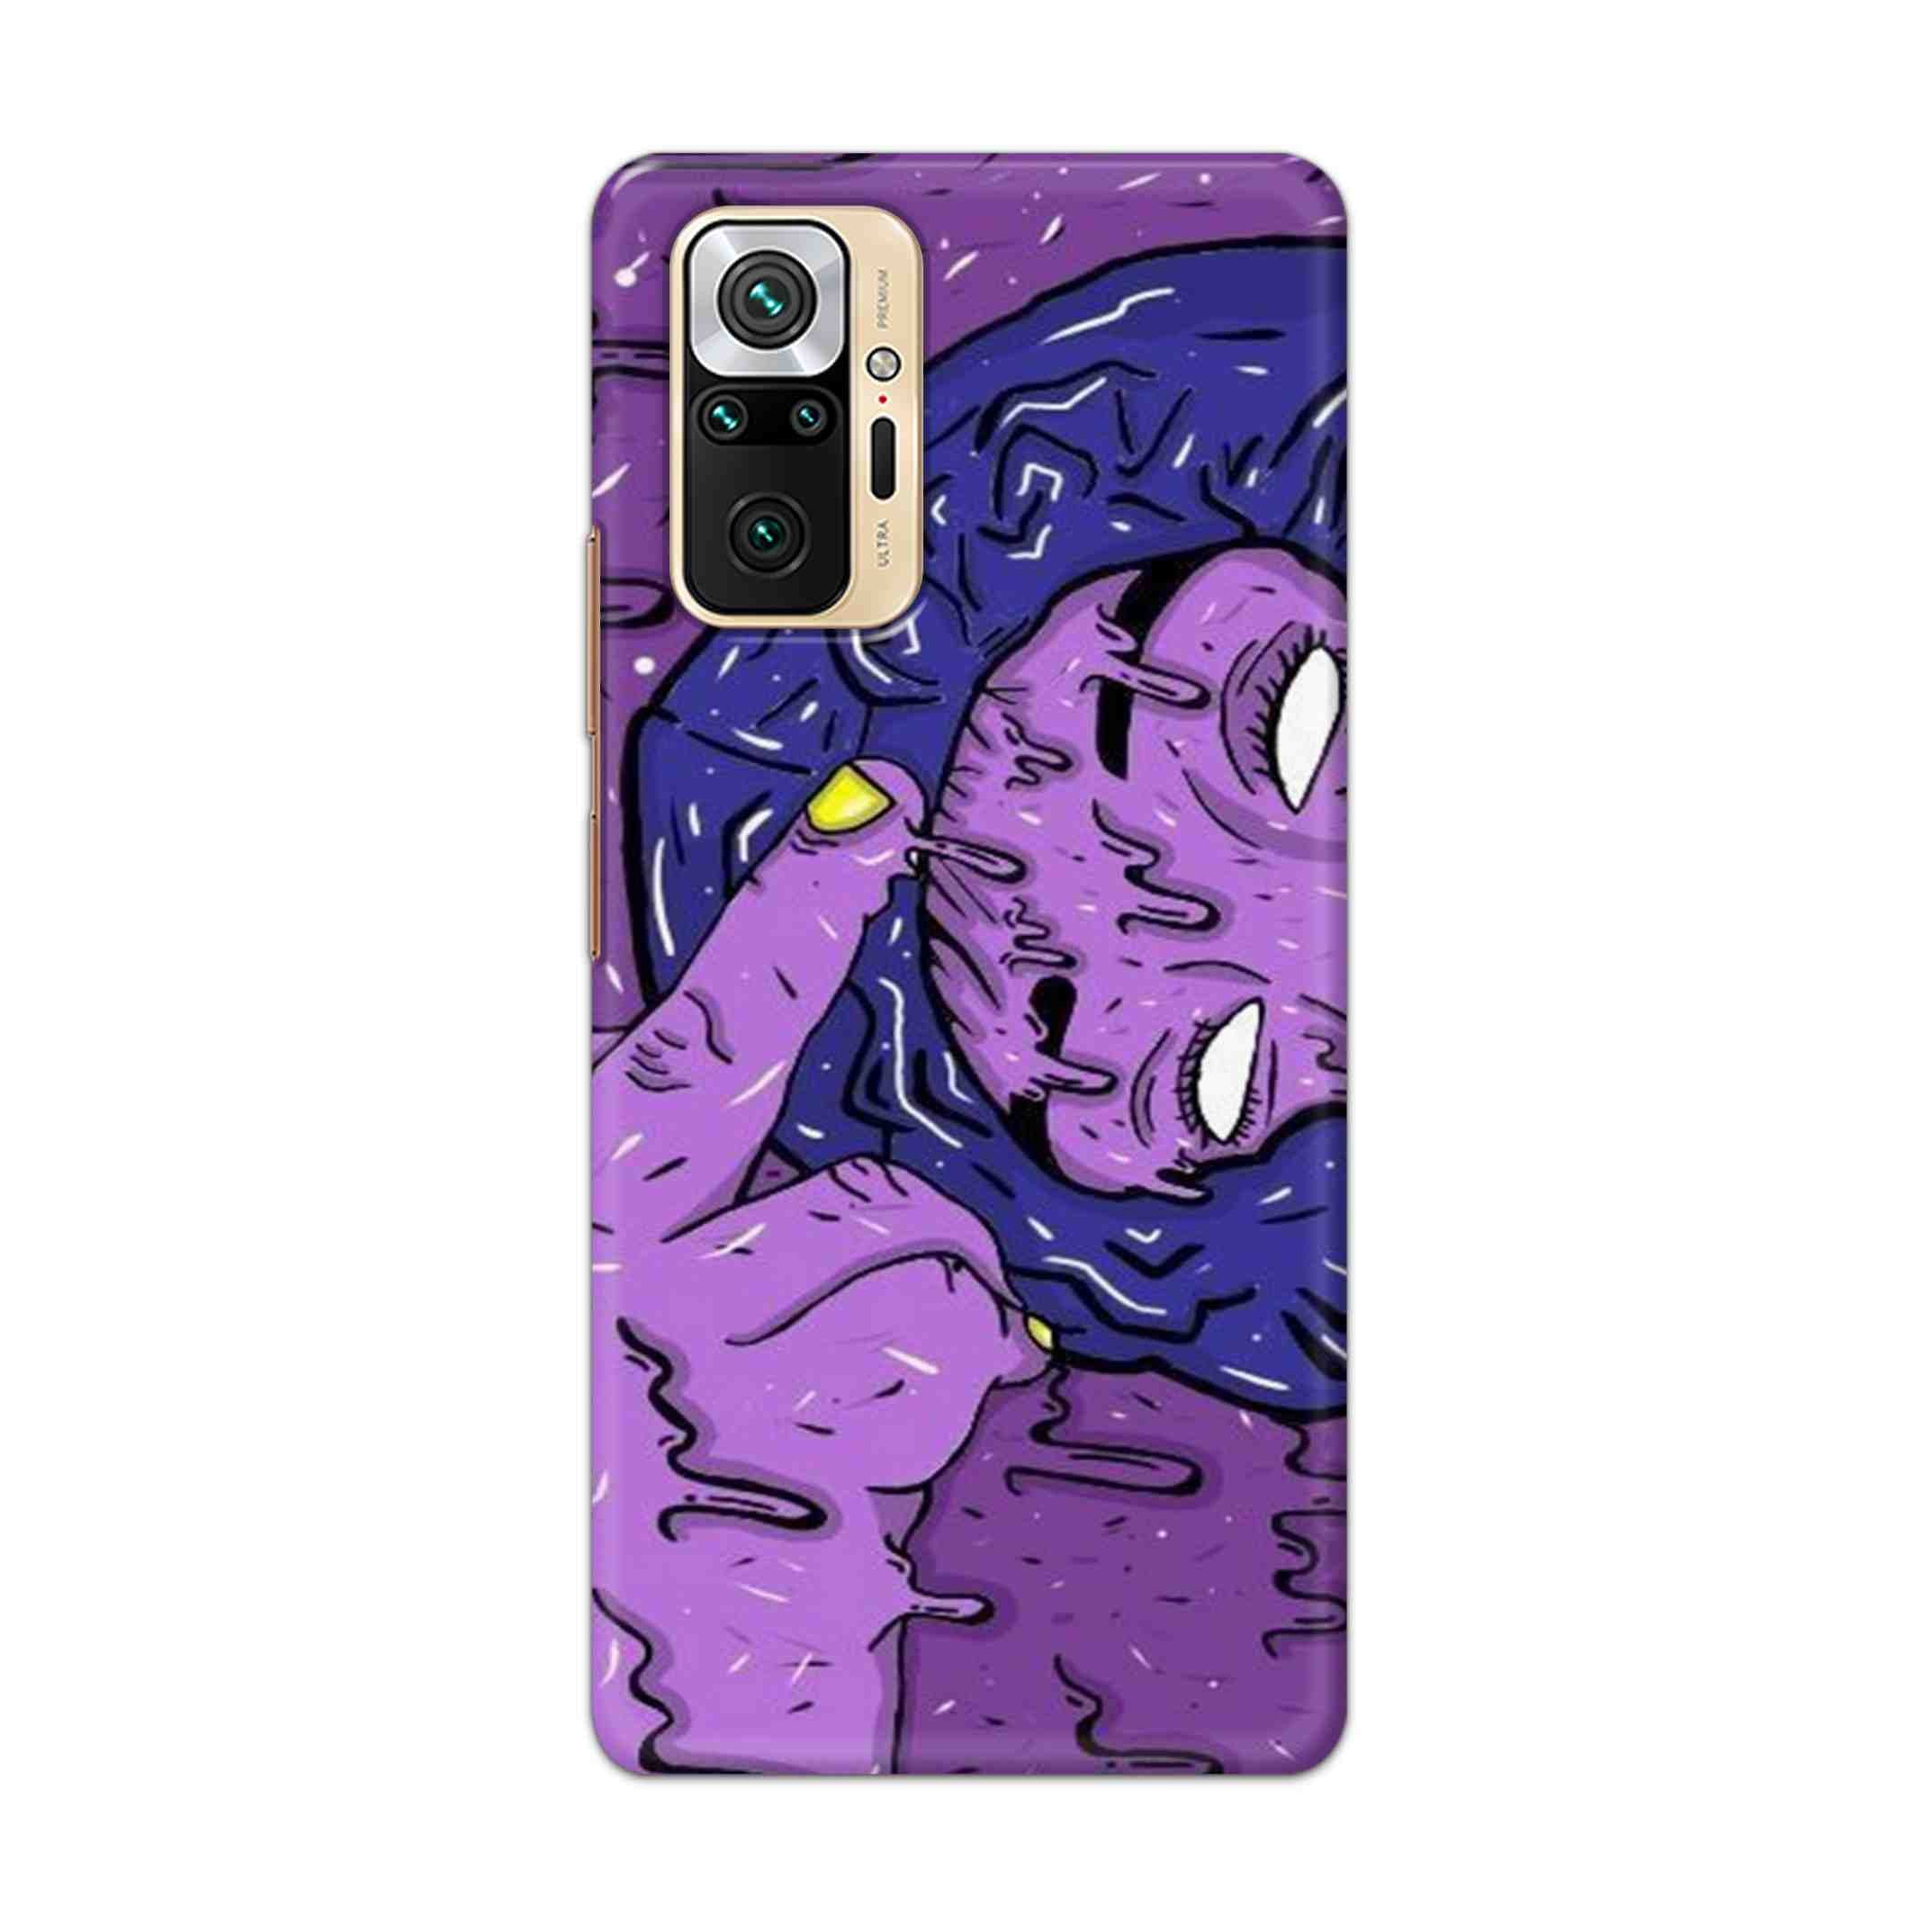 Buy Dashing Art Hard Back Mobile Phone Case Cover For Redmi Note 10 Pro Online